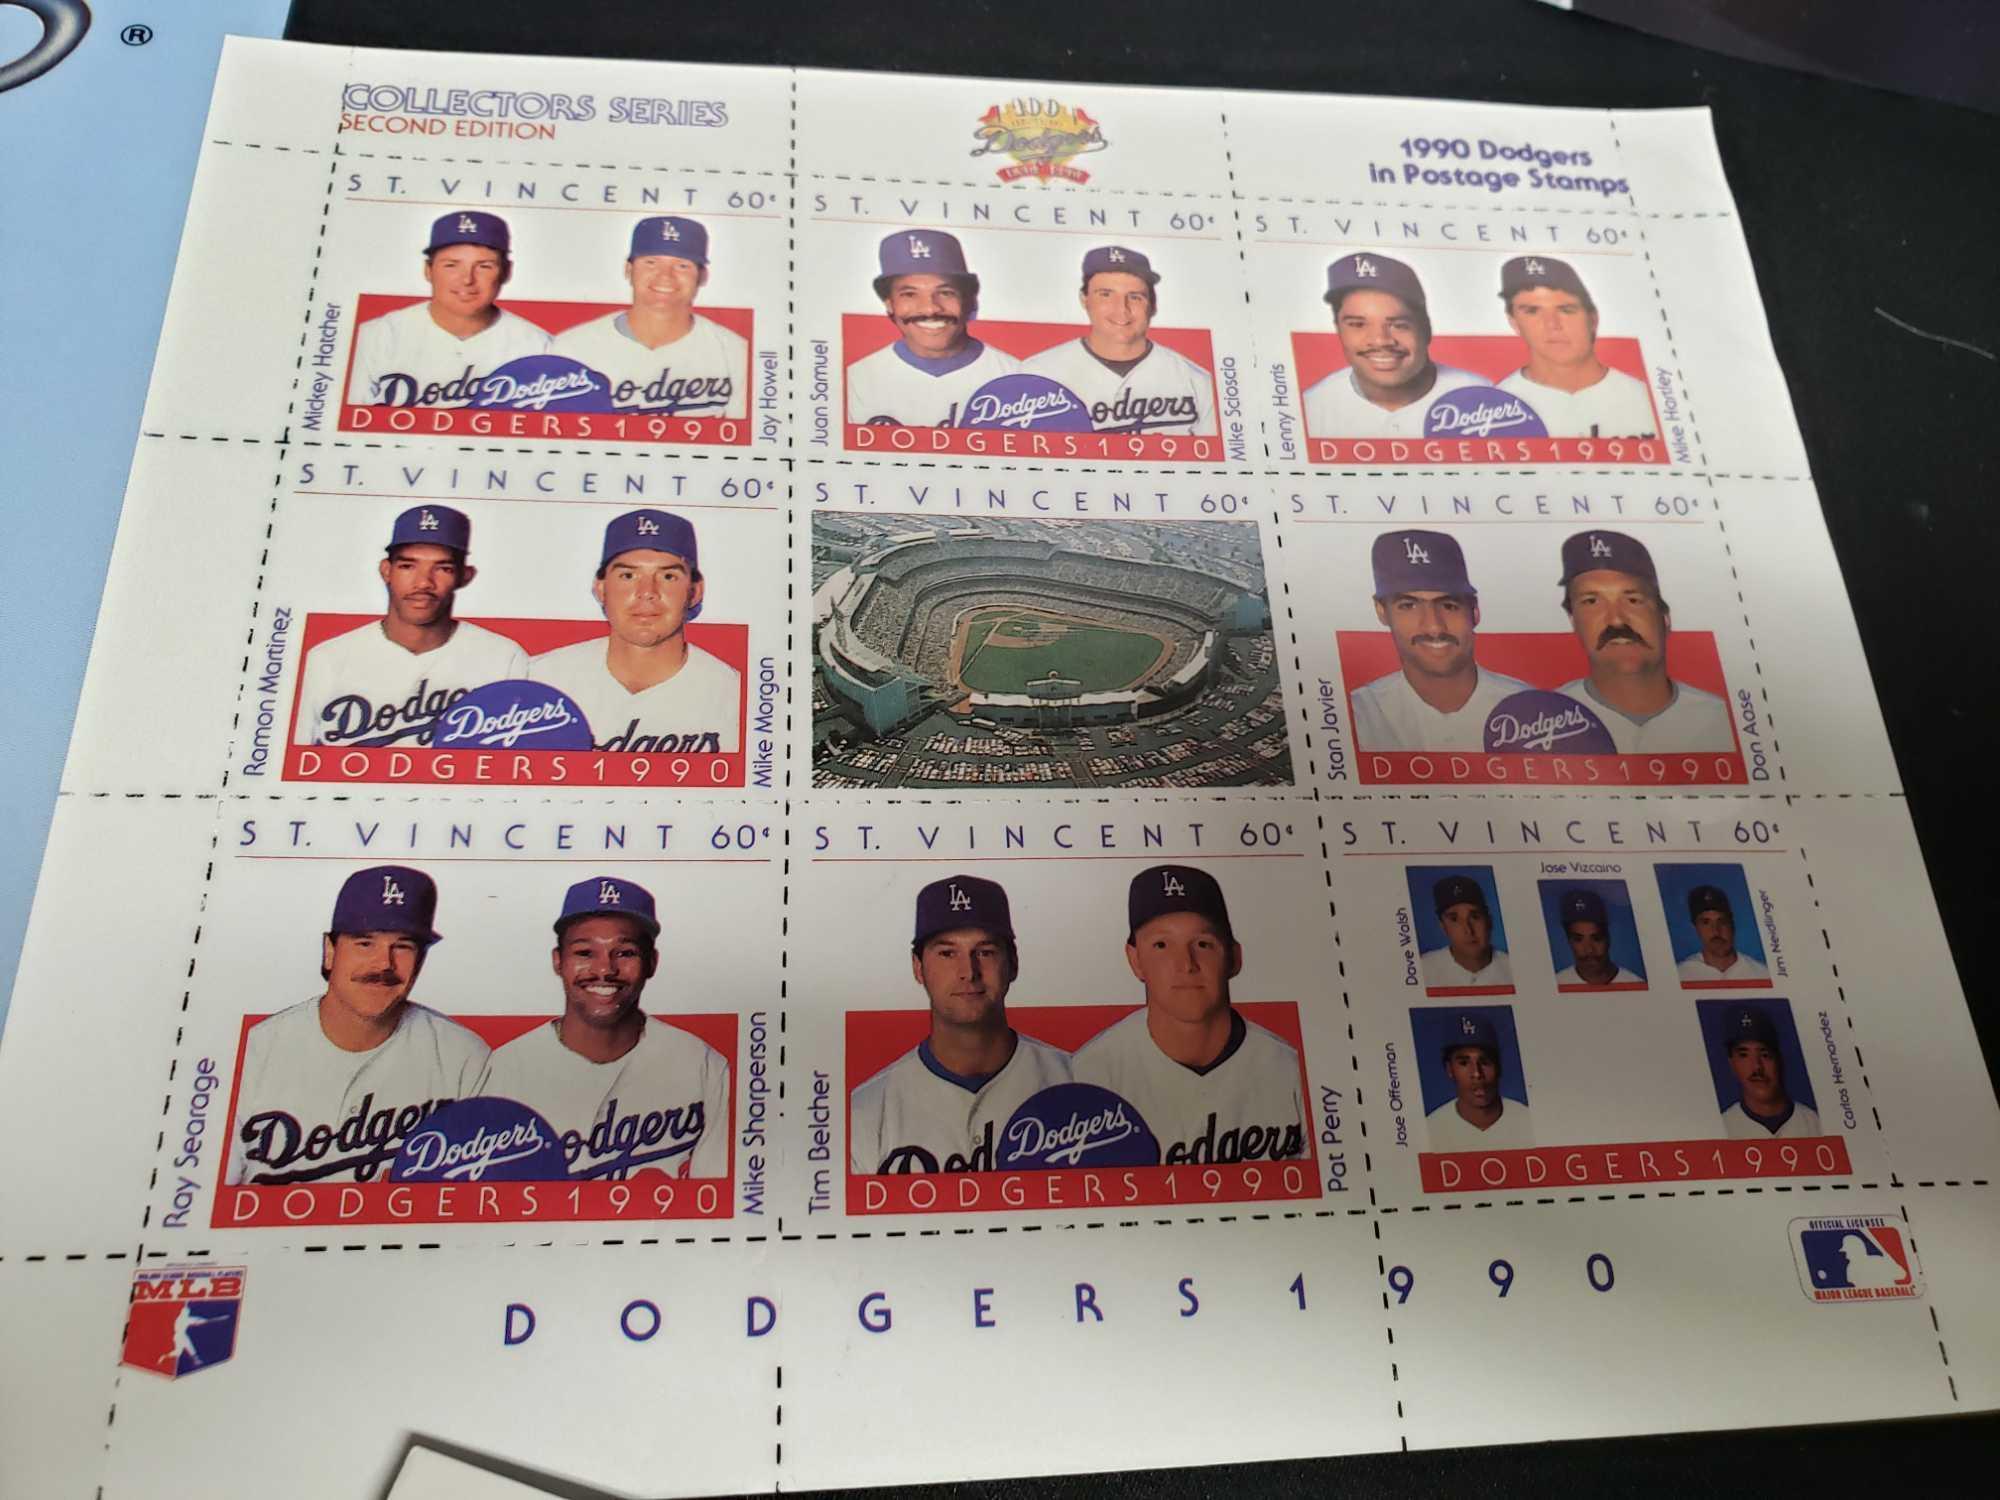 100 Anniversary os Angelos Dodgers Commemorative stamp collection and team photo